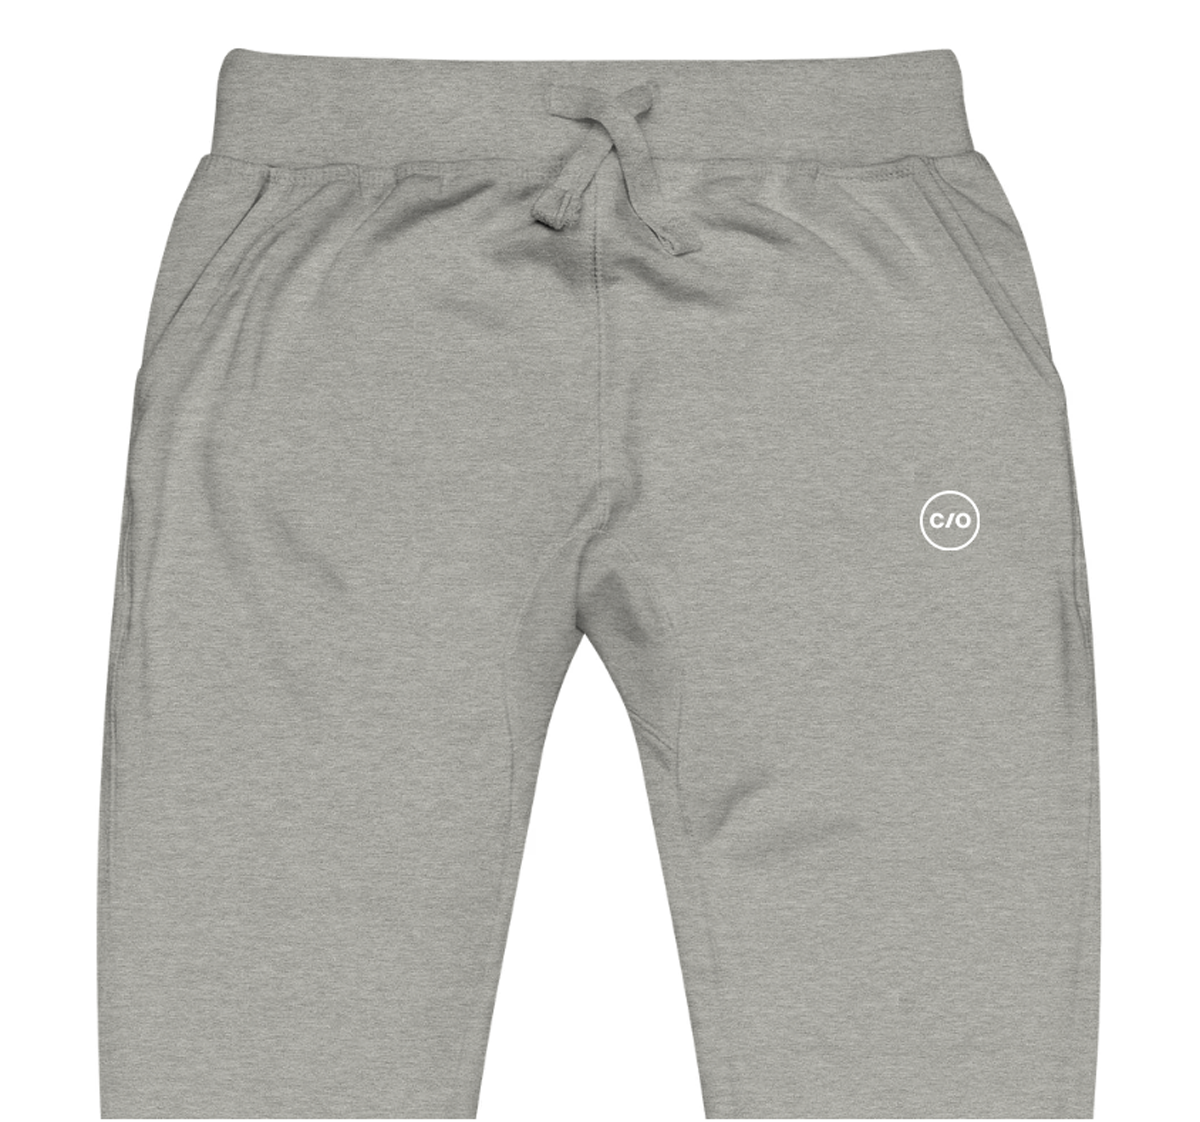 Neue Supply Co. Women's Performance Jogger in Grey